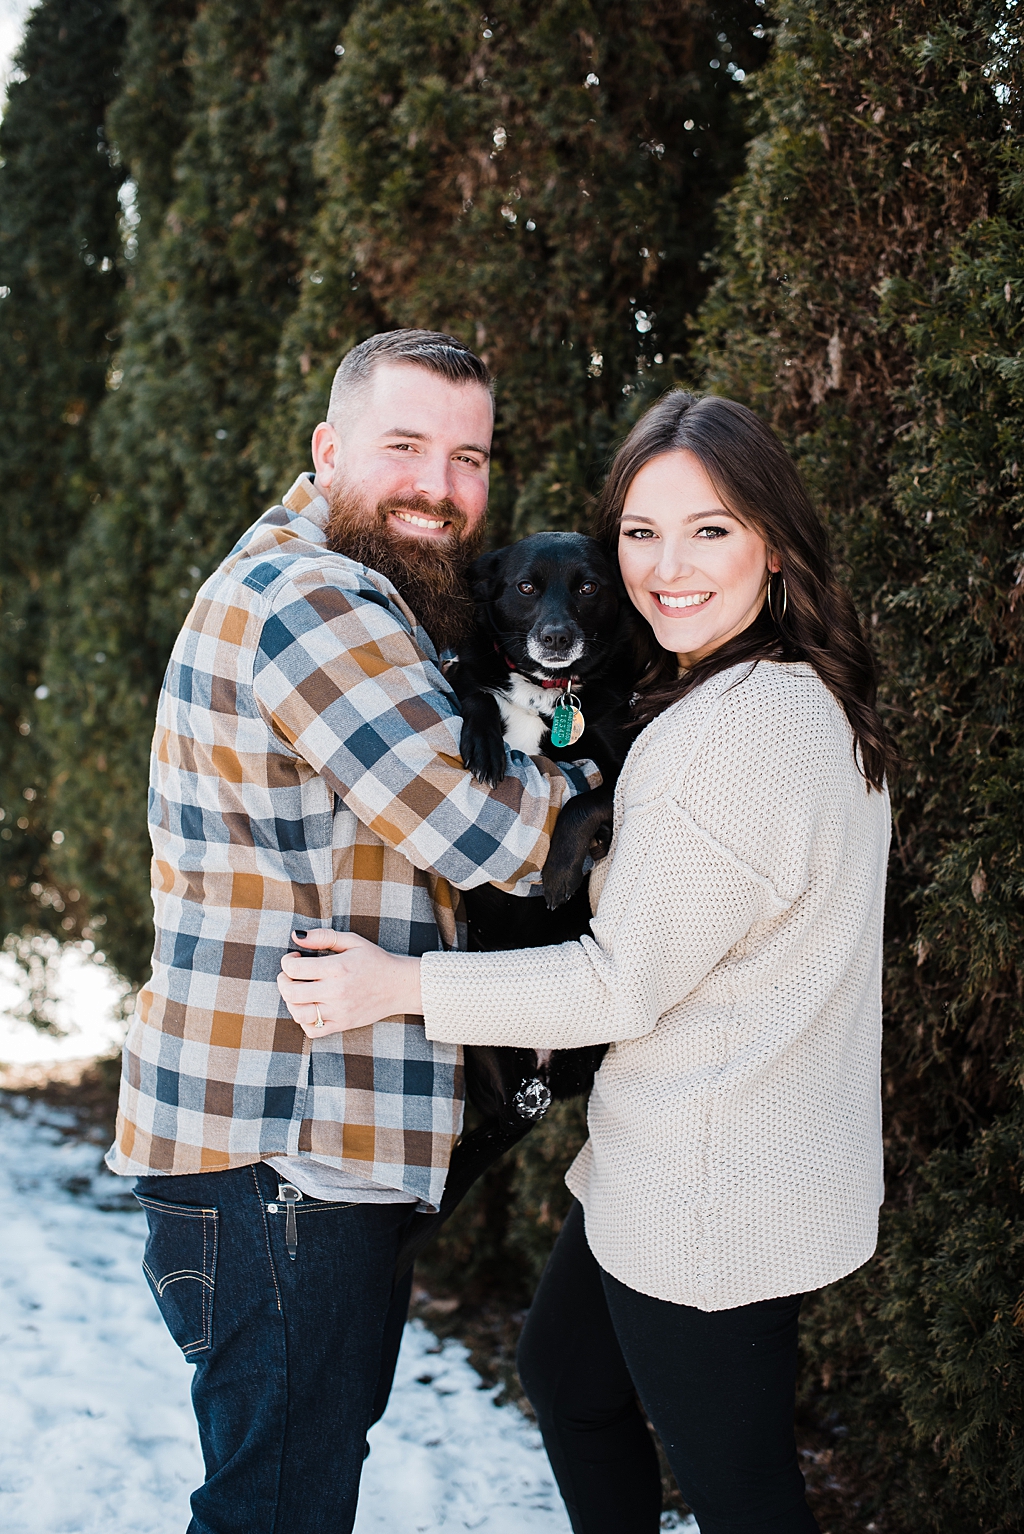 Indoor engagement Session, Snowy Engagement Session